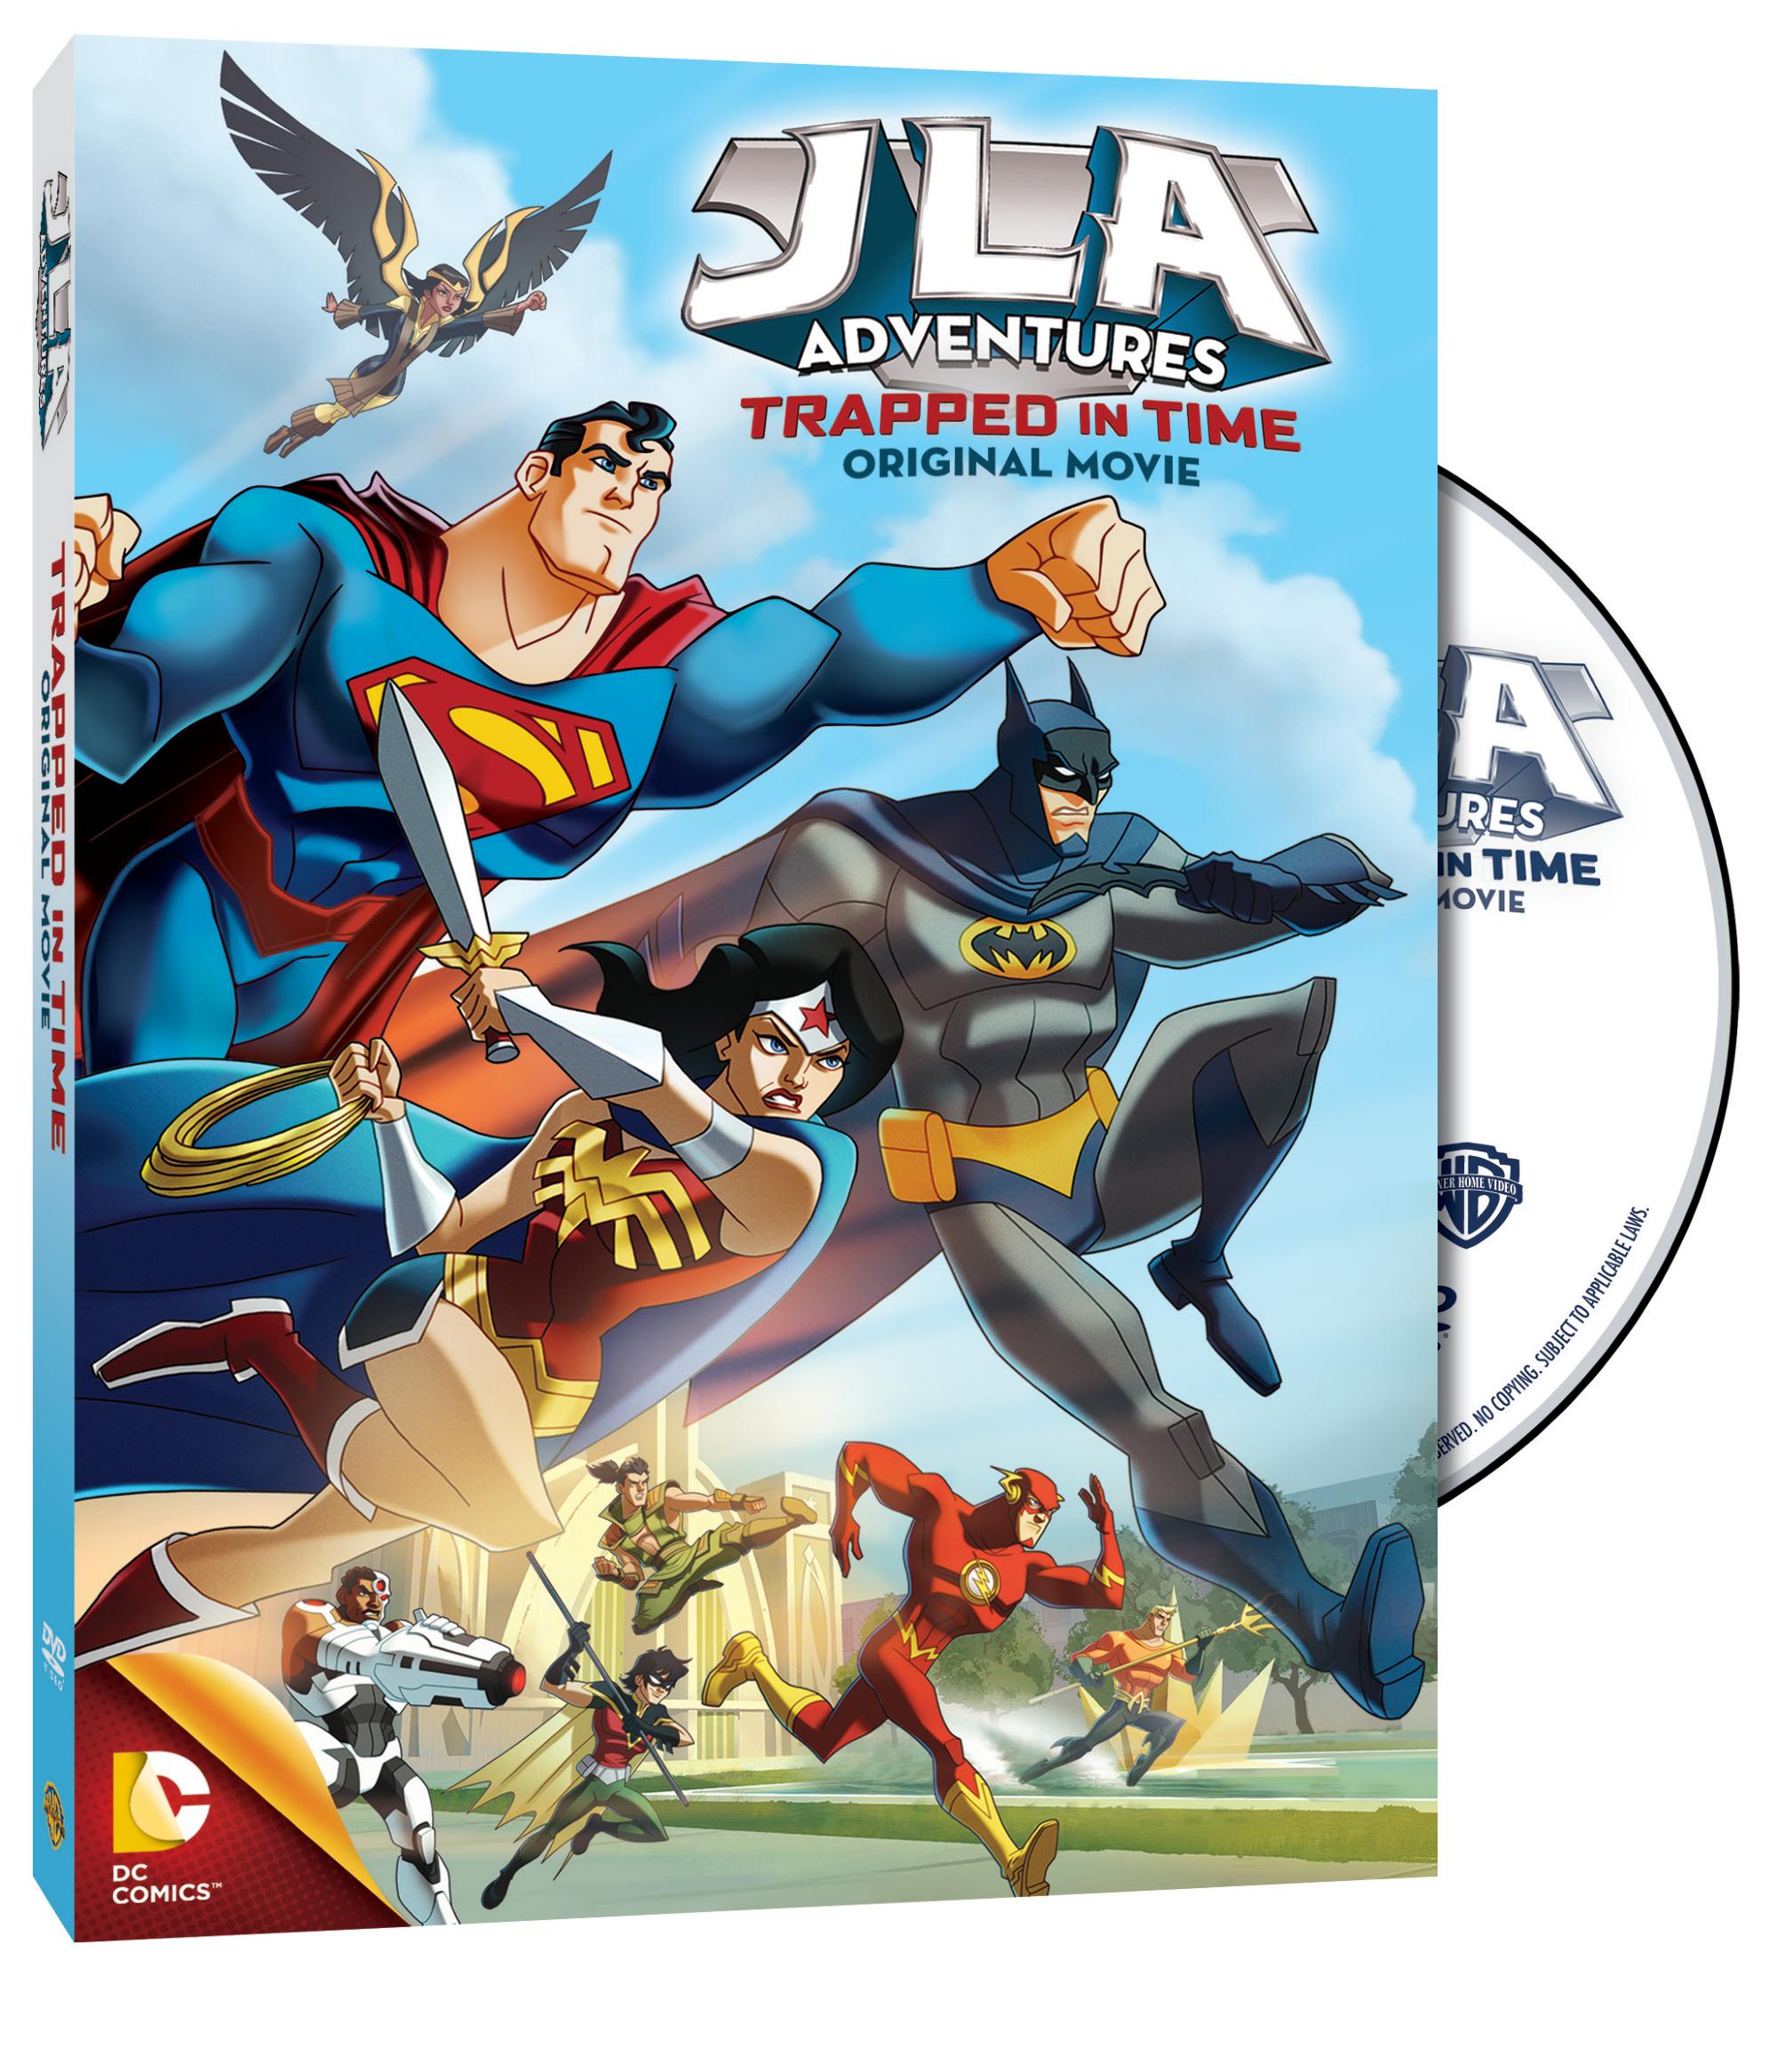 JLA Adventures: Trapped in Time  Image courtesy of Warner Bros.